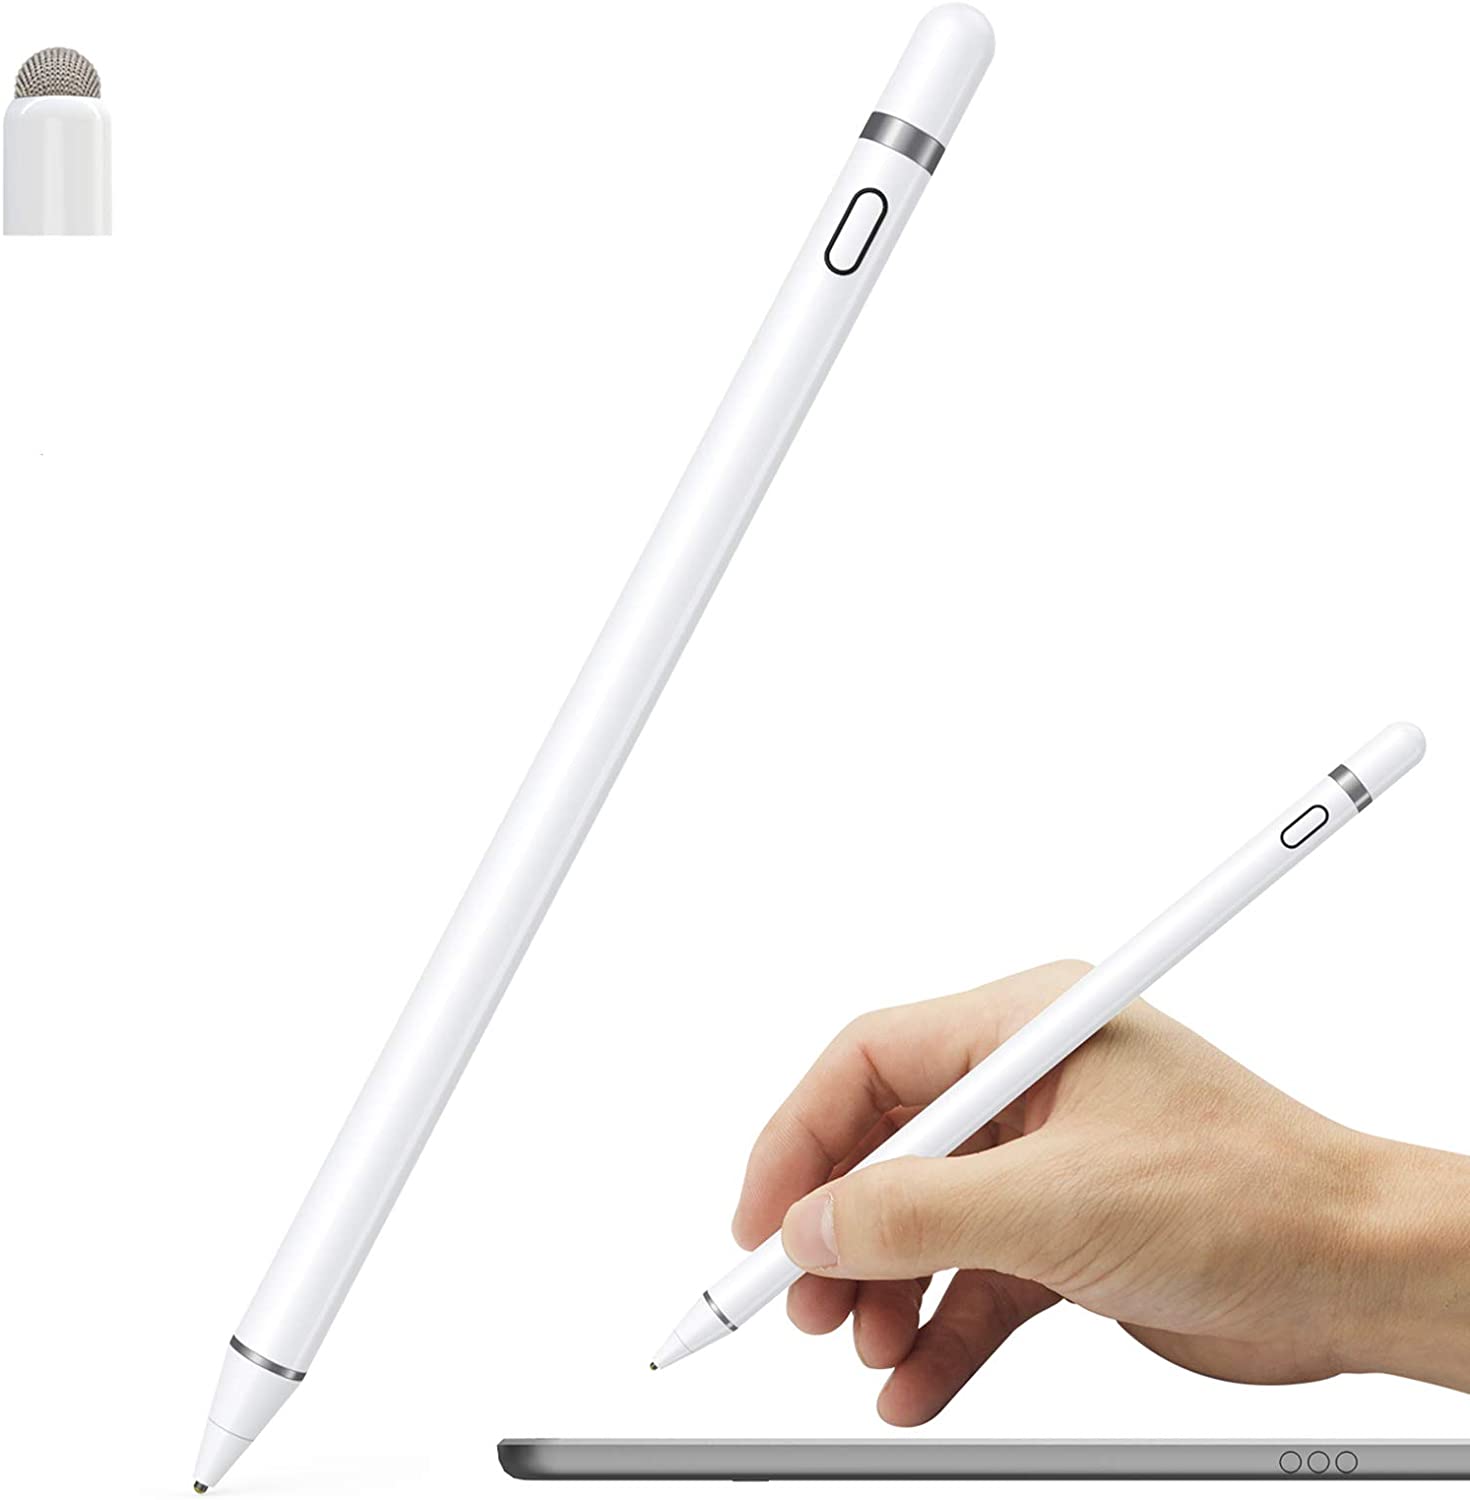 Good Wholesale Vendors Active Stylus Pen Bluetooth - Active Stylus Pen Compatible for iOS&Android Touch Screens, Pencil for iPad with Dual Touch Function,Rechargeable Stylus for iPad/iPad Pro/...